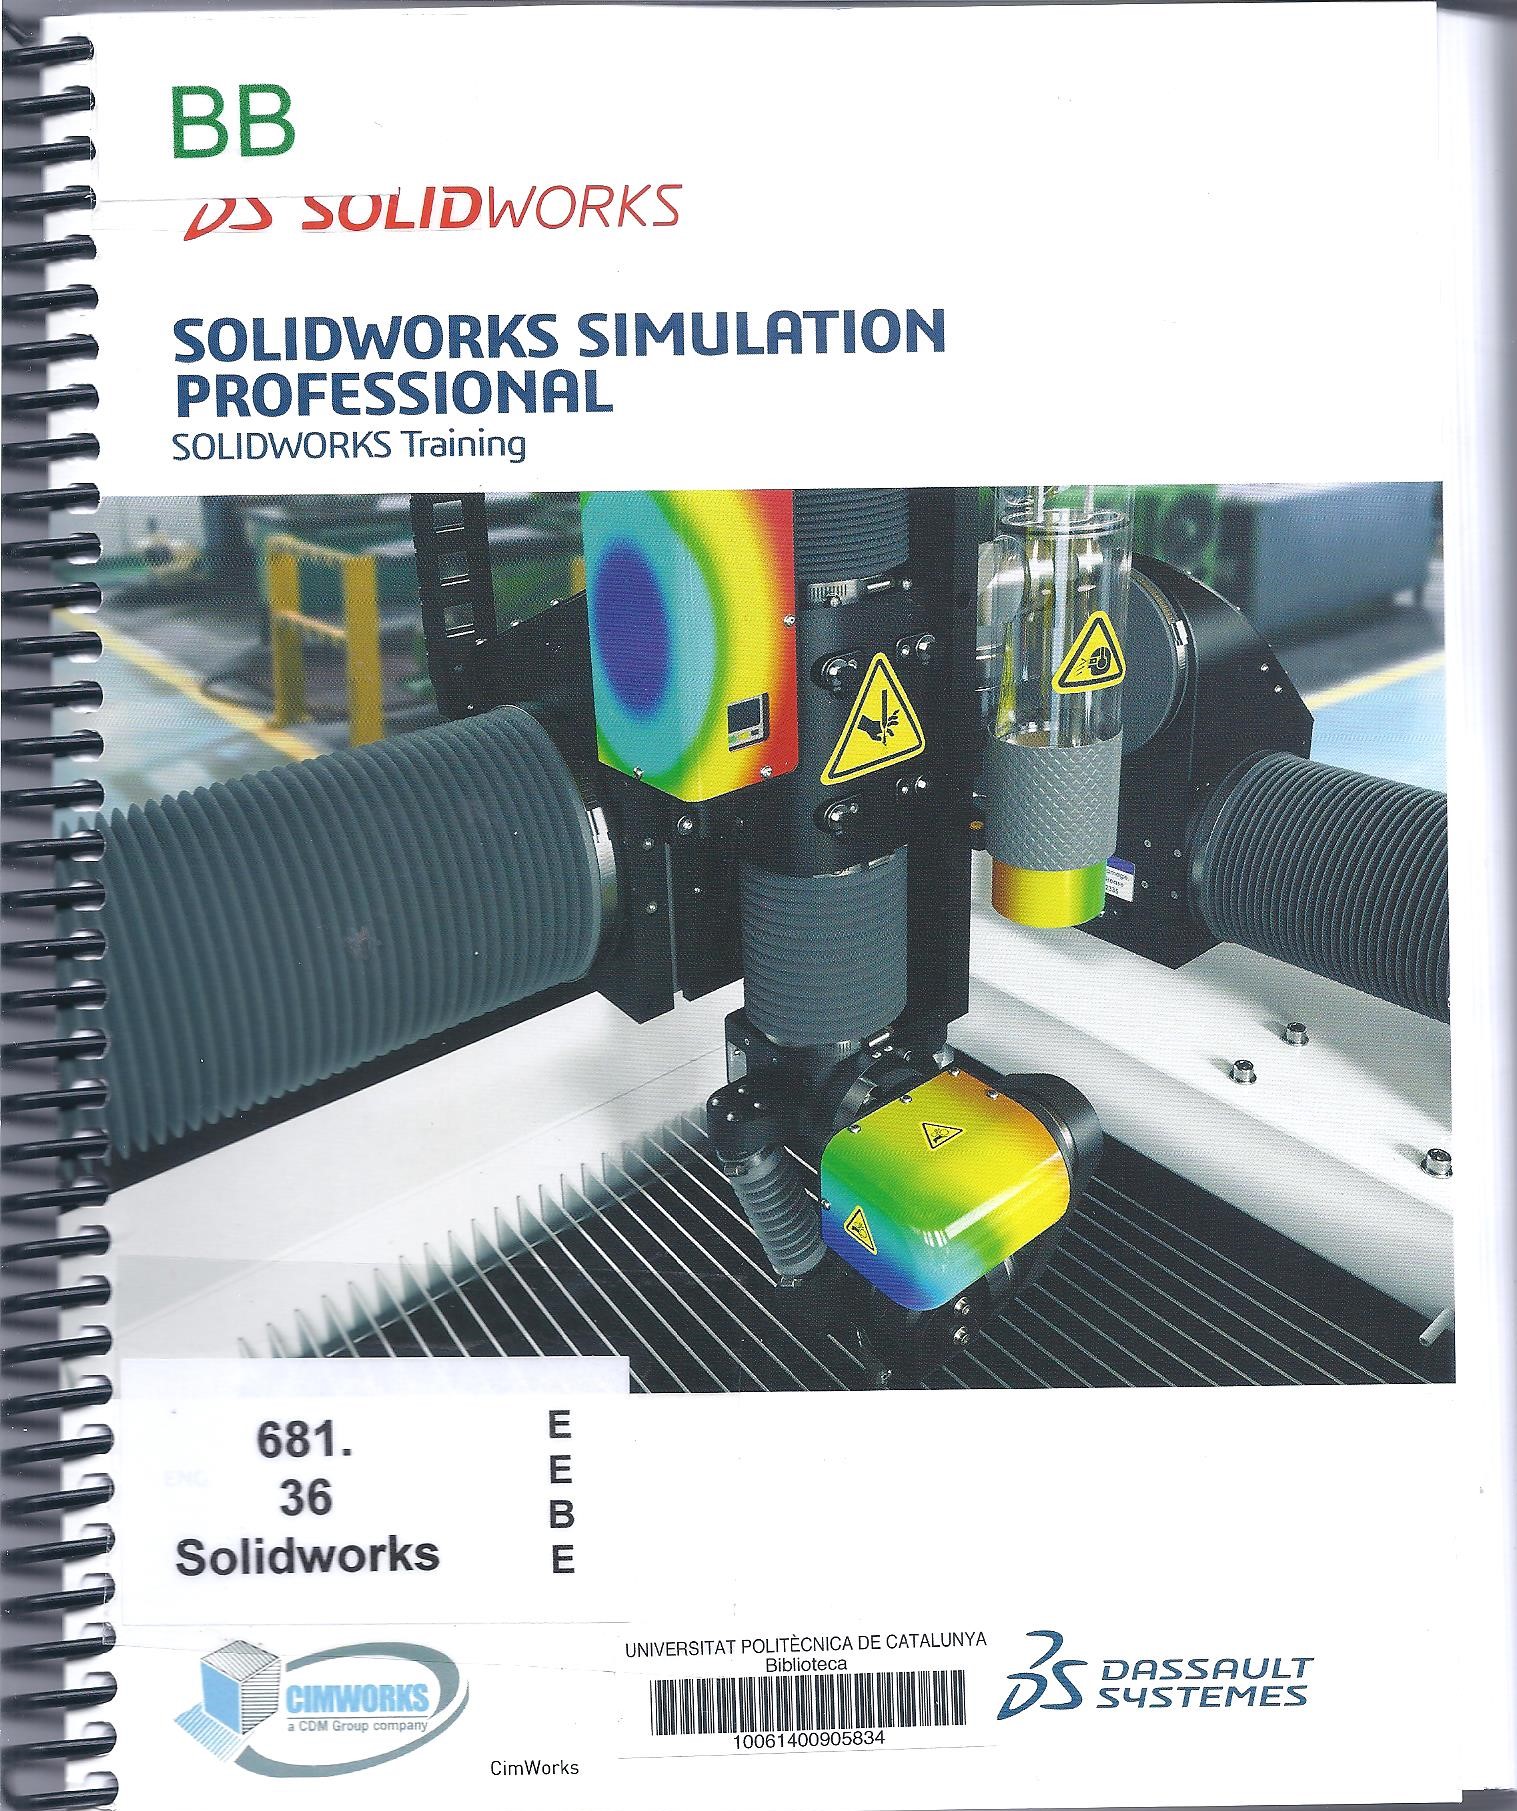 Solidworks simulation professional/ Solidworks